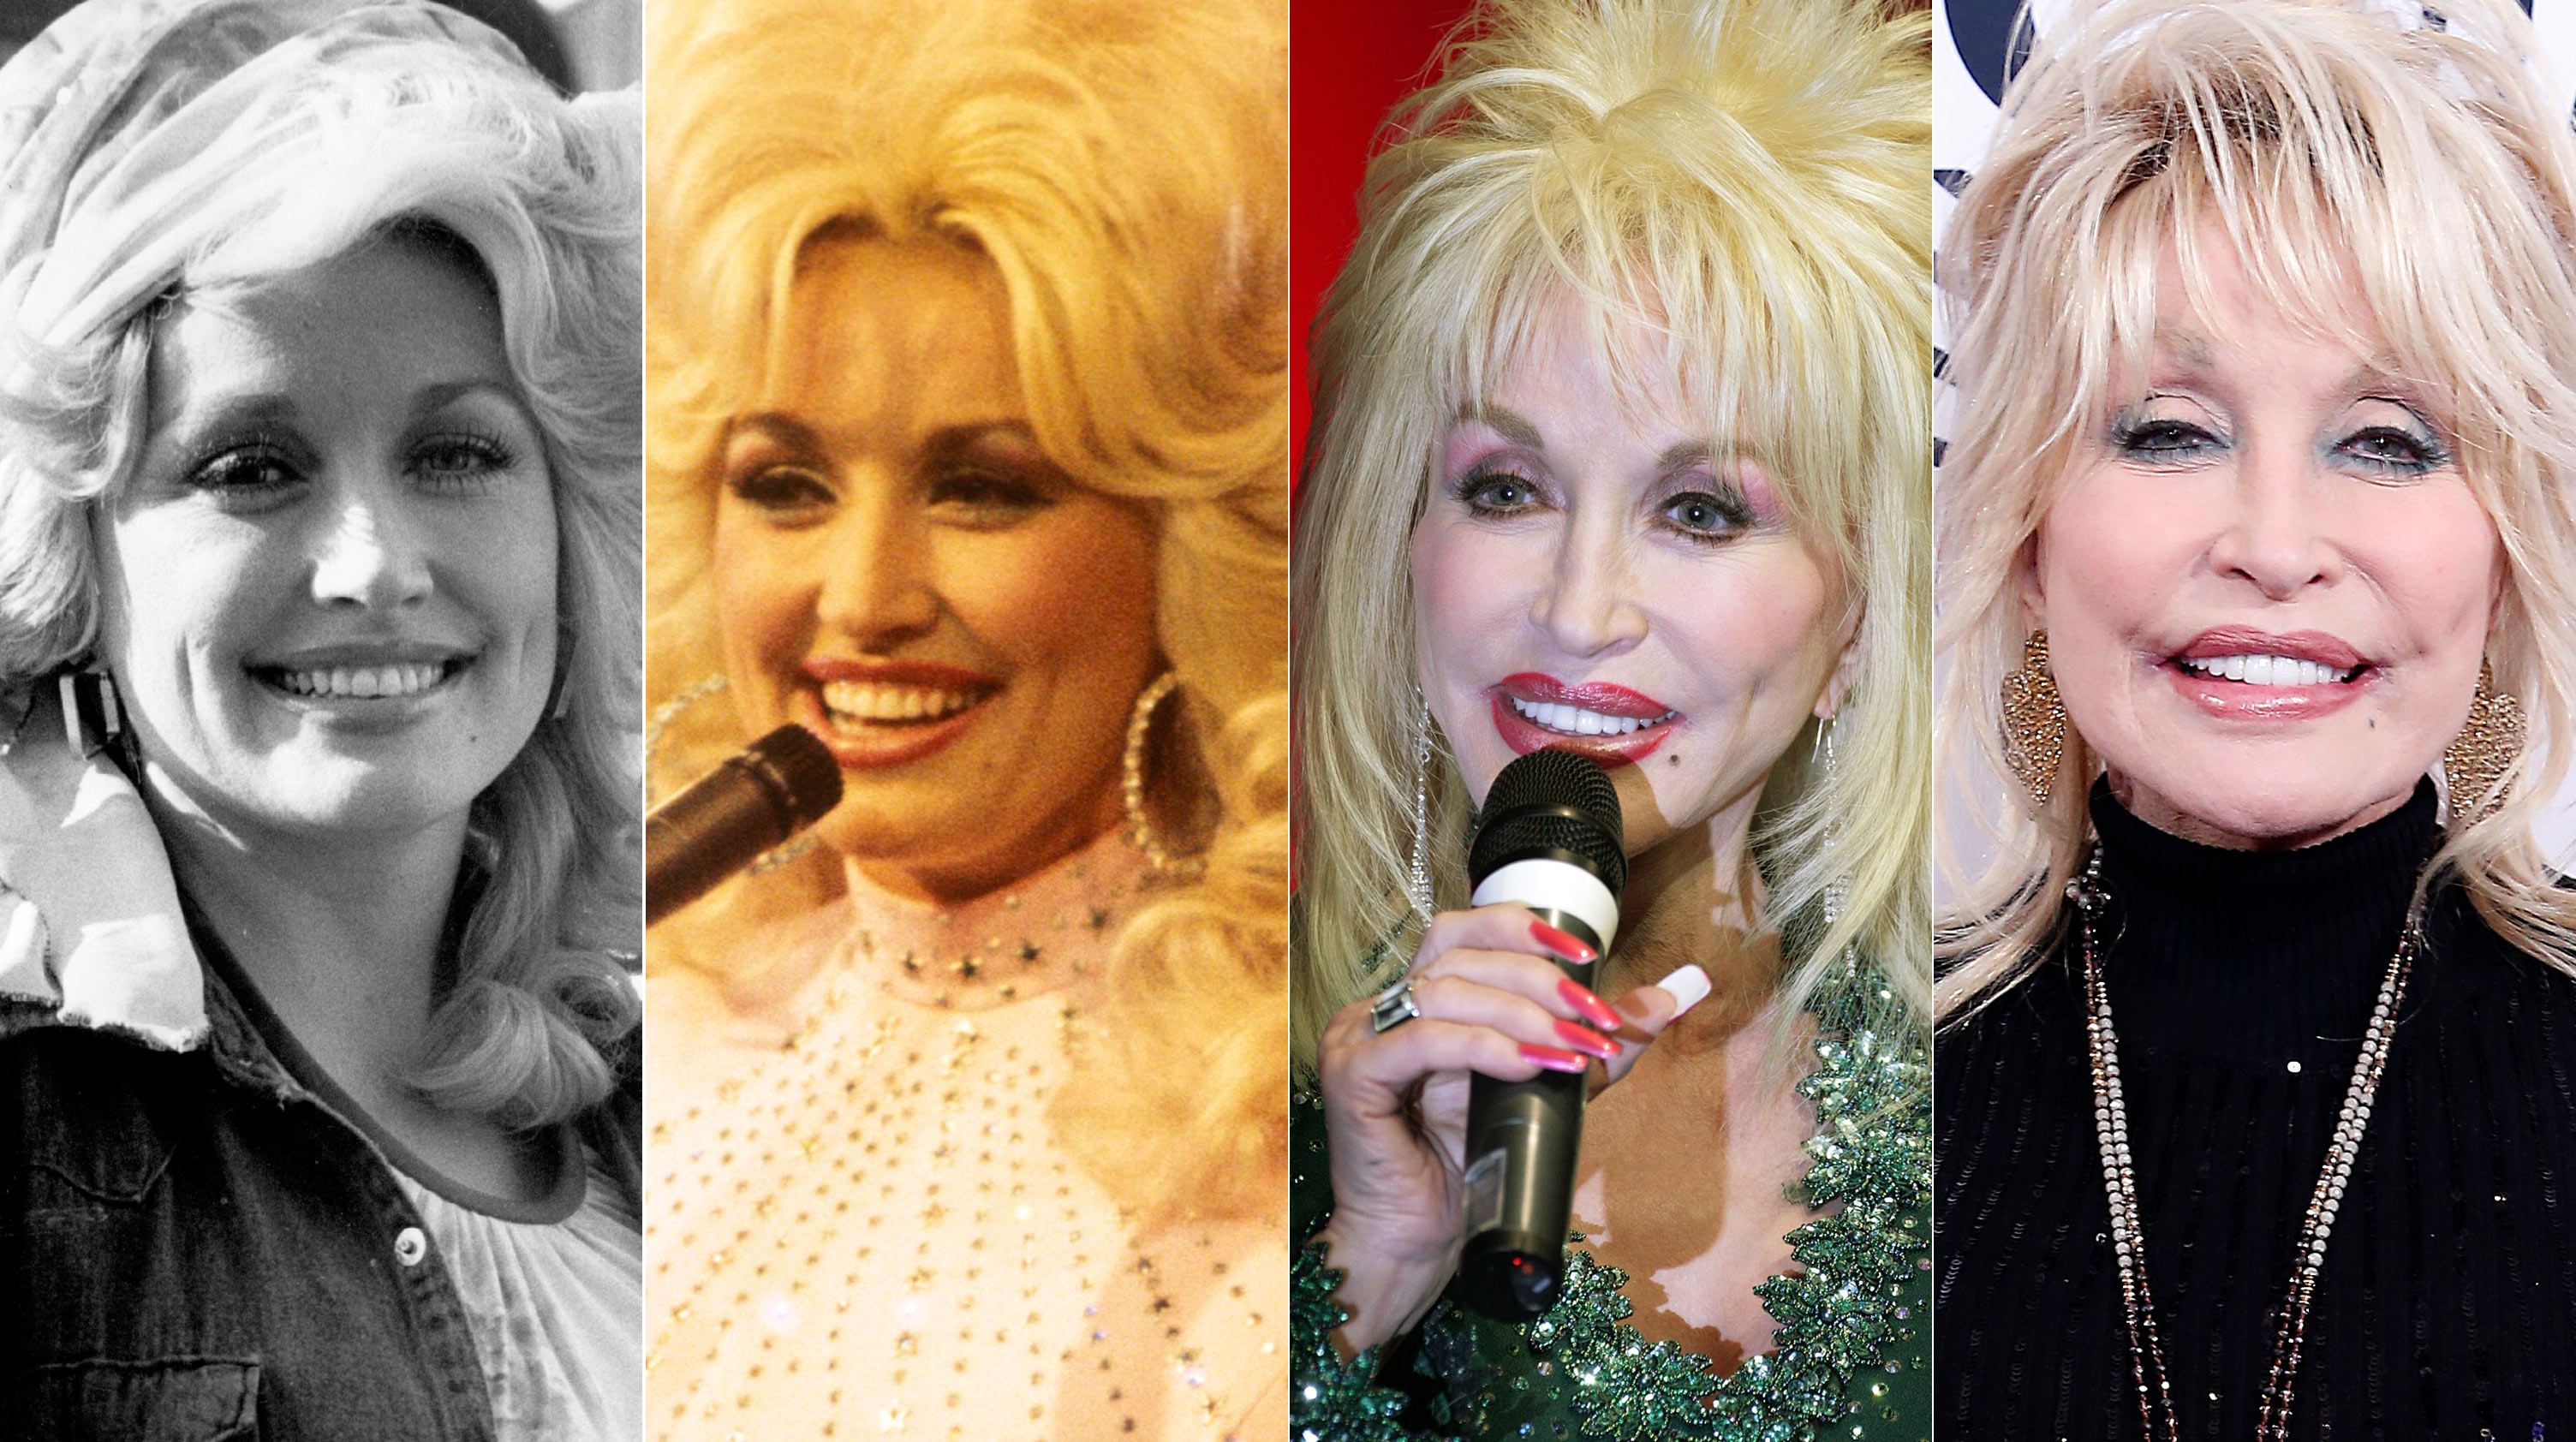 How did Dolly Parton get her look?